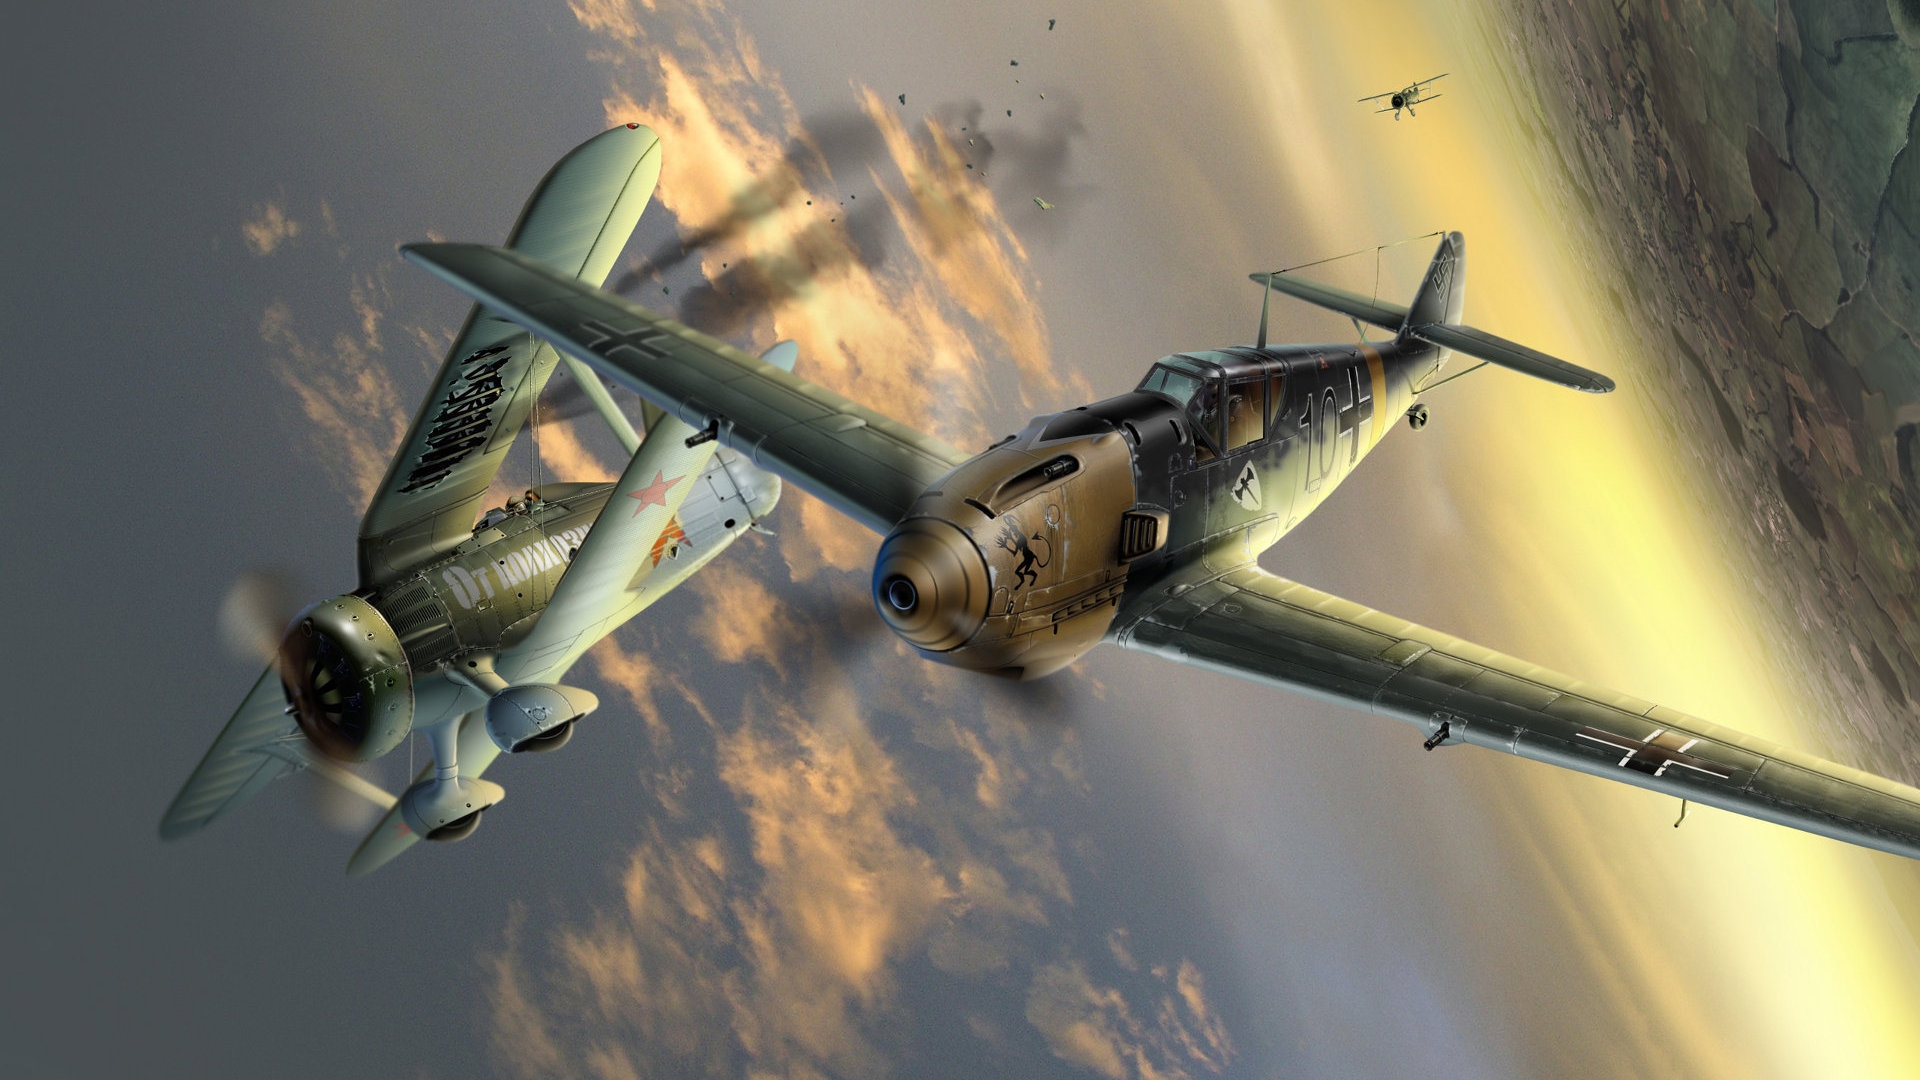 Me 109 War II Fighter Aircraft for 1920 x 1080 HDTV 1080p resolution